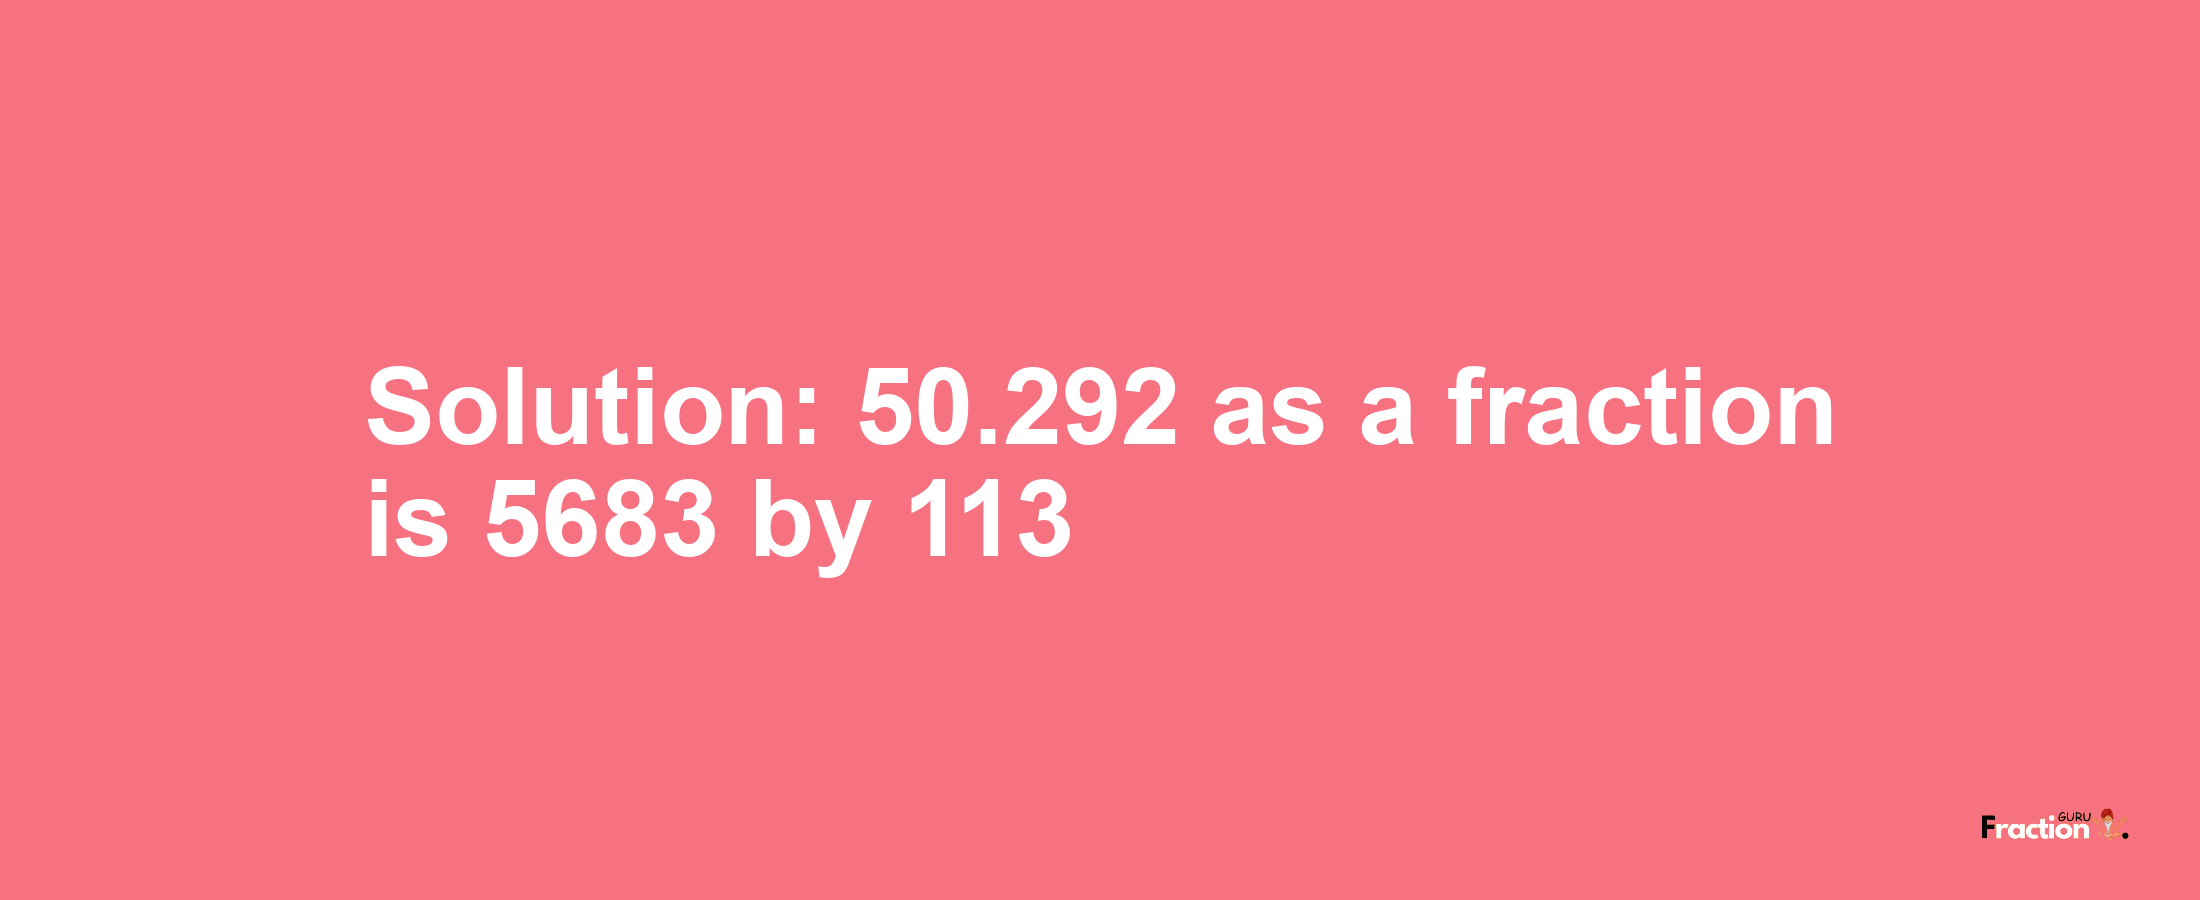 Solution:50.292 as a fraction is 5683/113